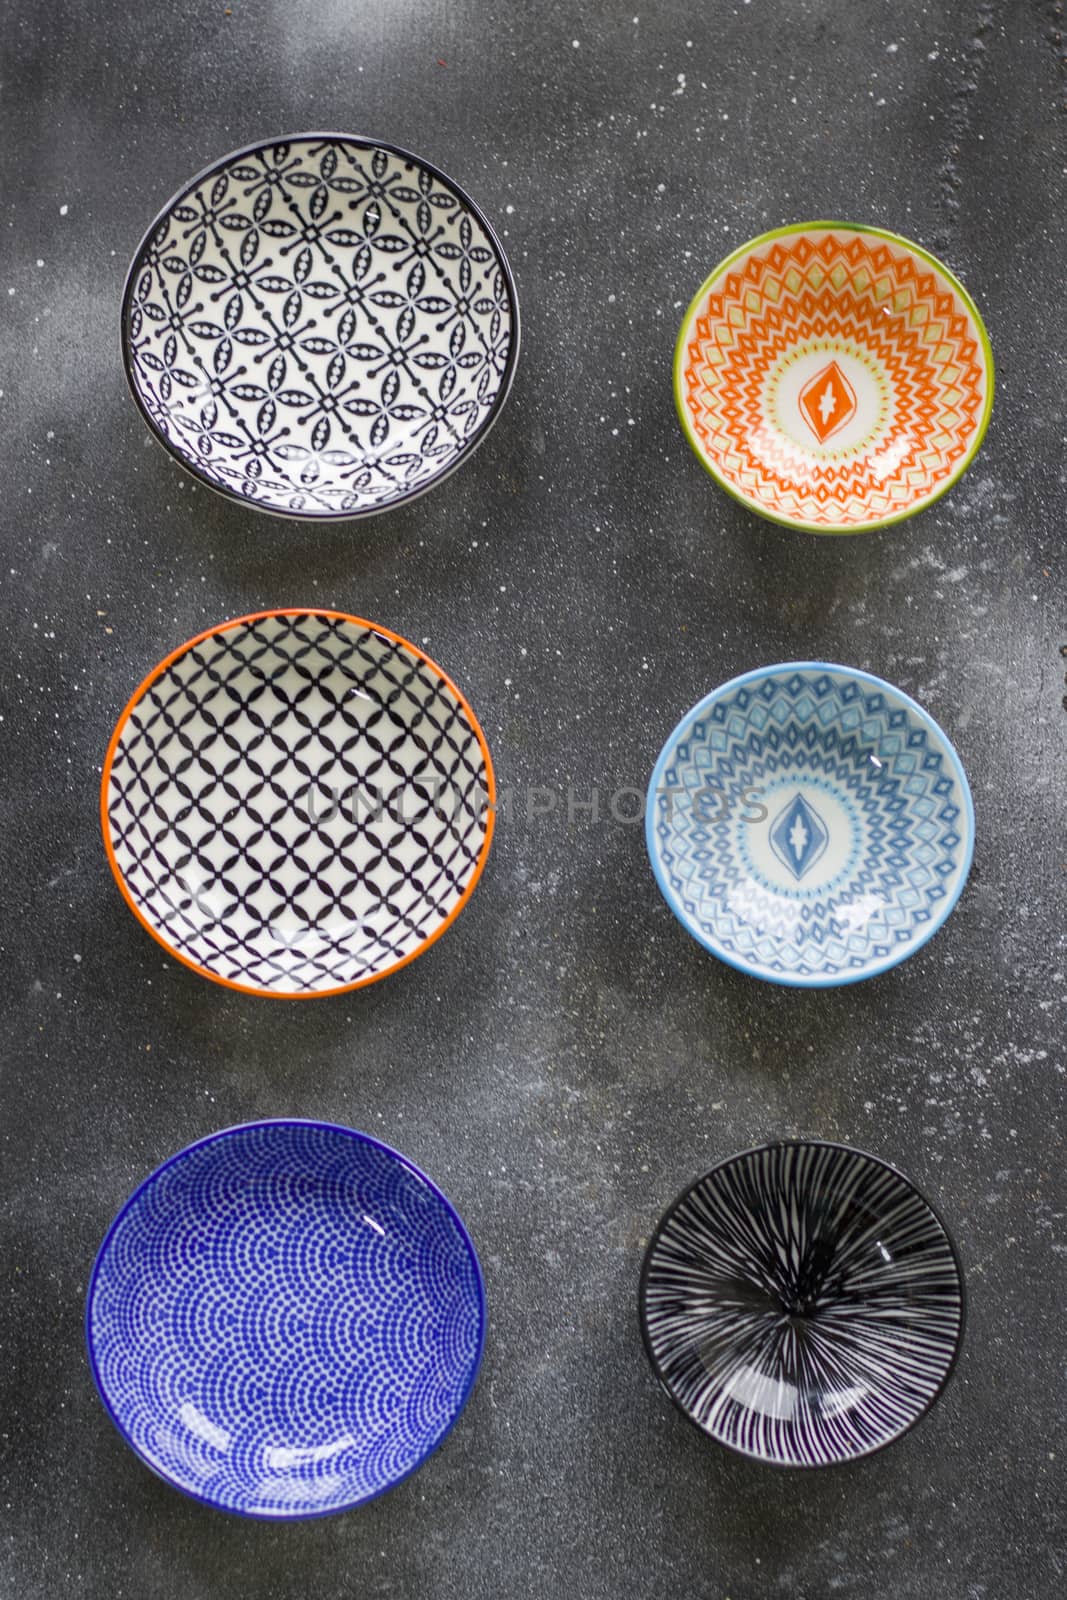 Colorful bowls on the black background, kitchen equipment on the table, bowl with geometric design.